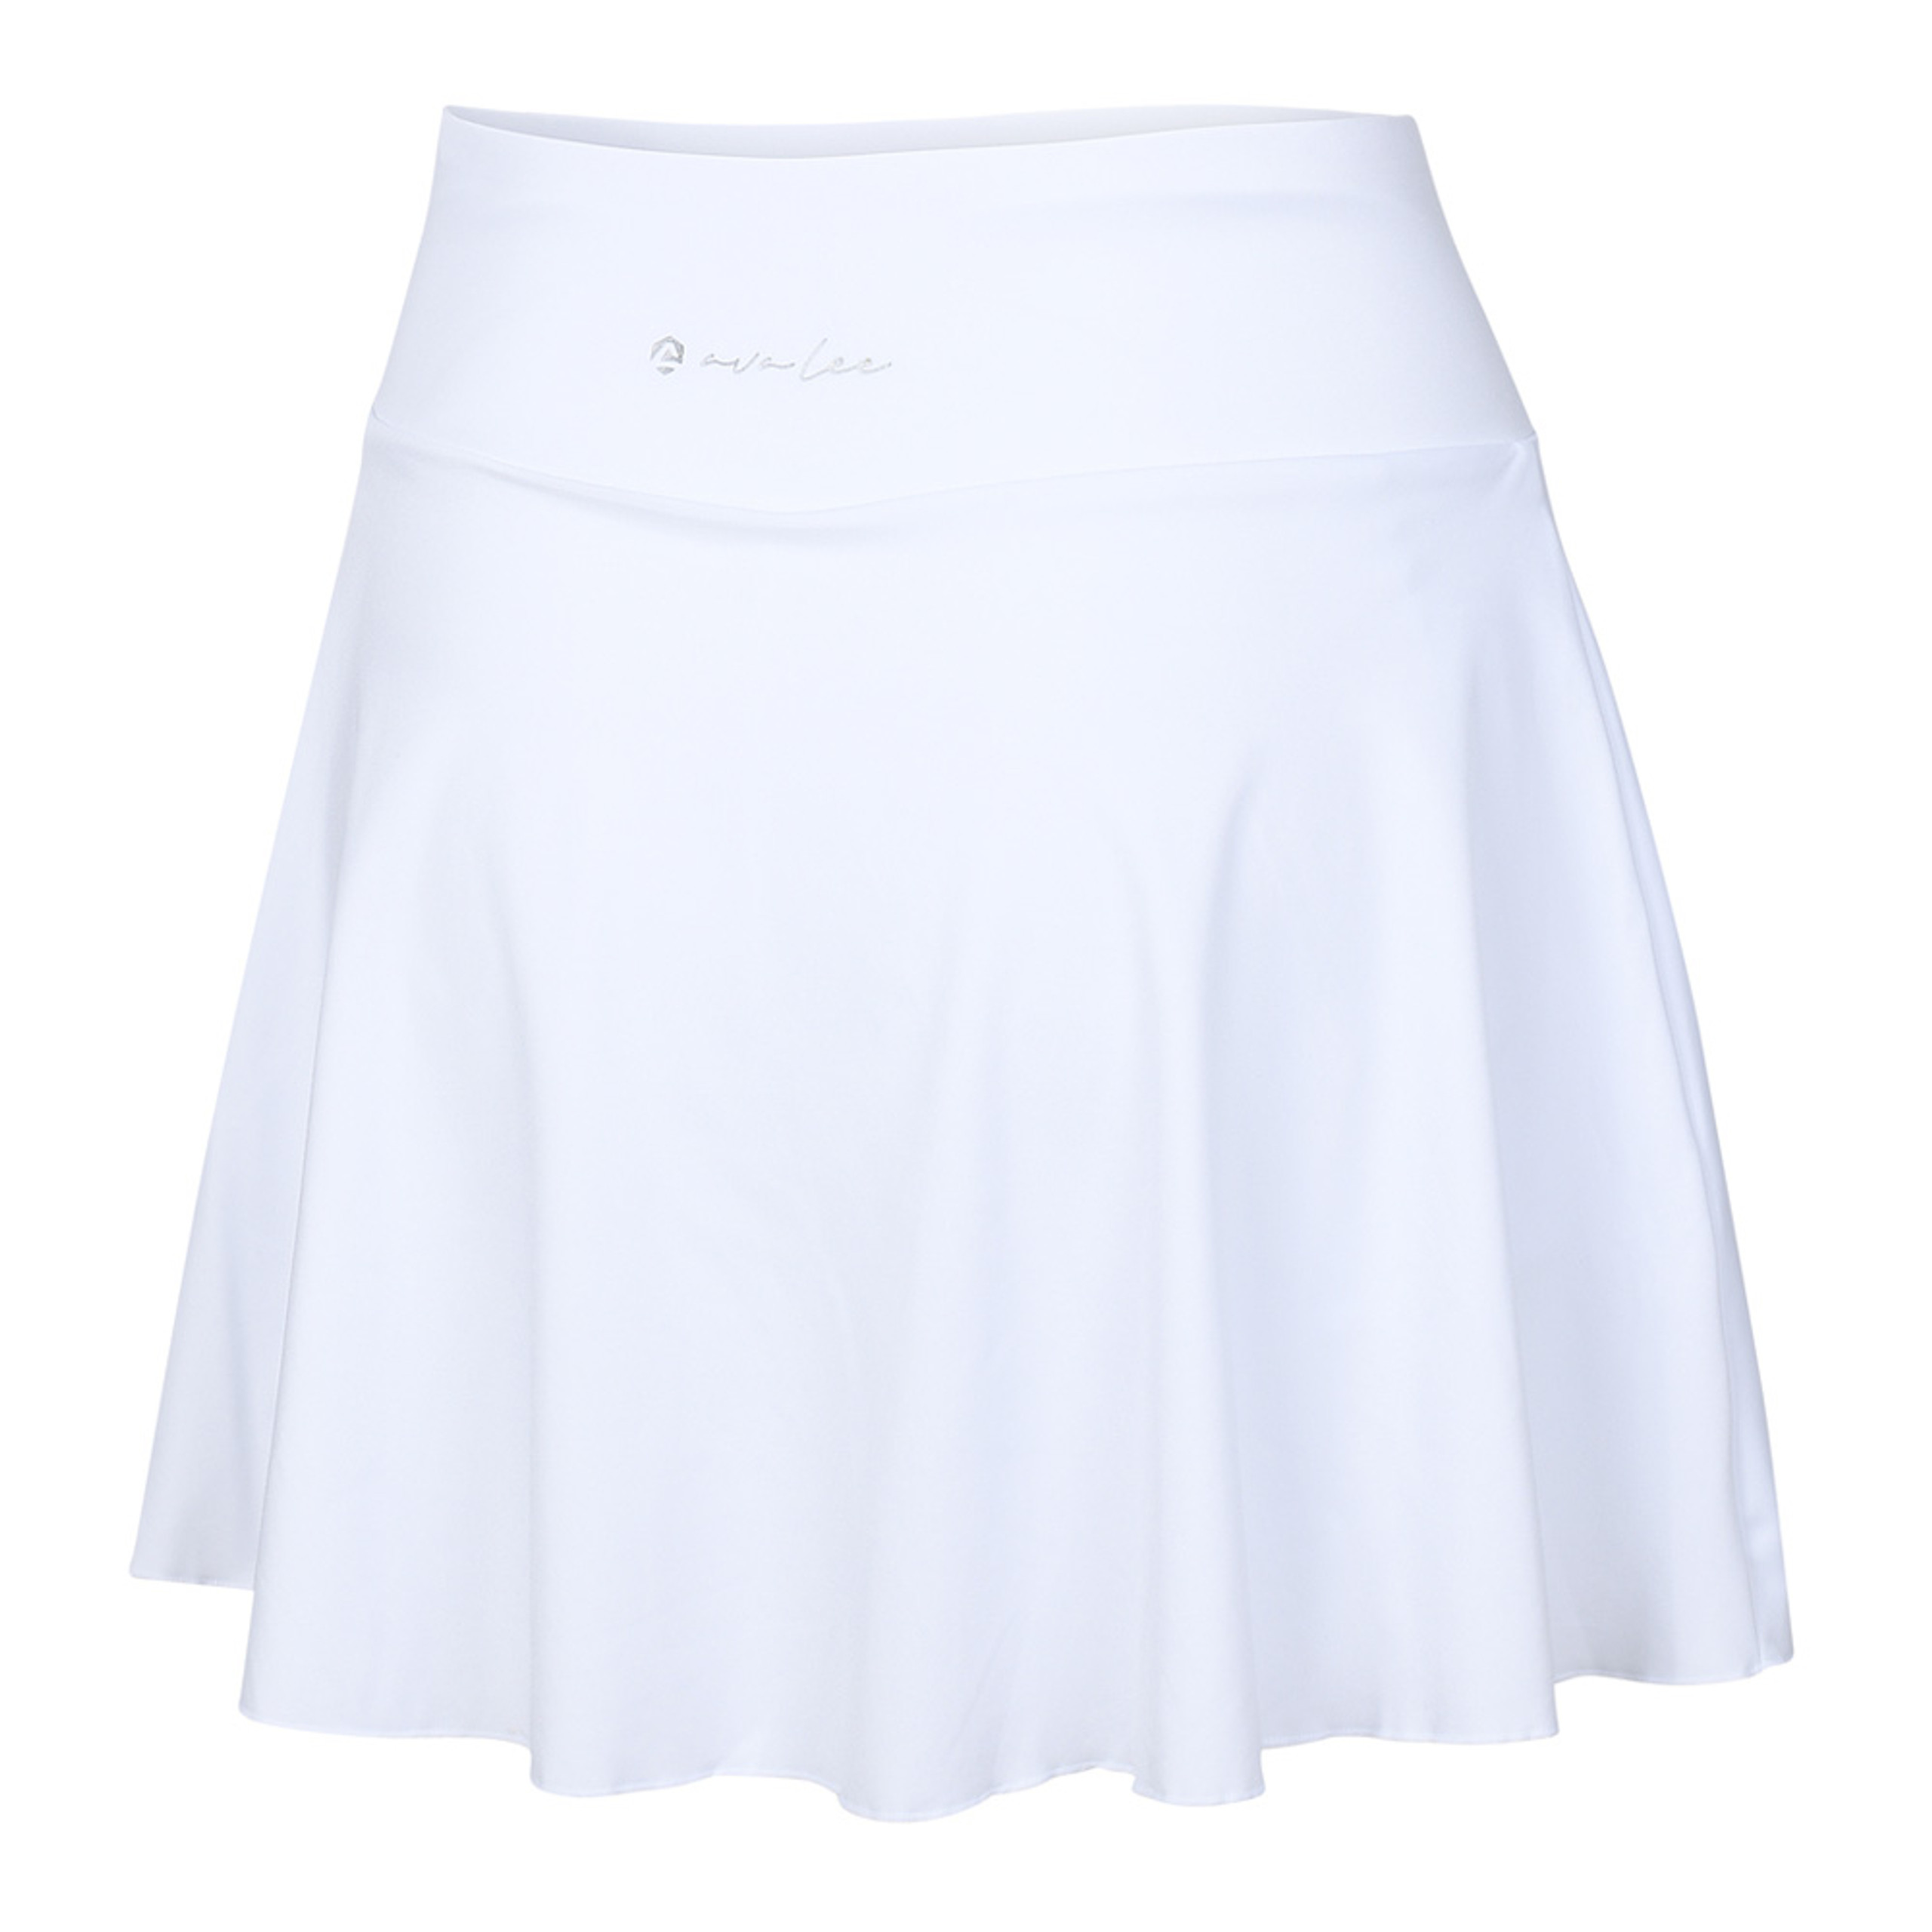 AvaLee by Selkirk Naples Twirl Skirt - Women's | Free Shipping Offer!